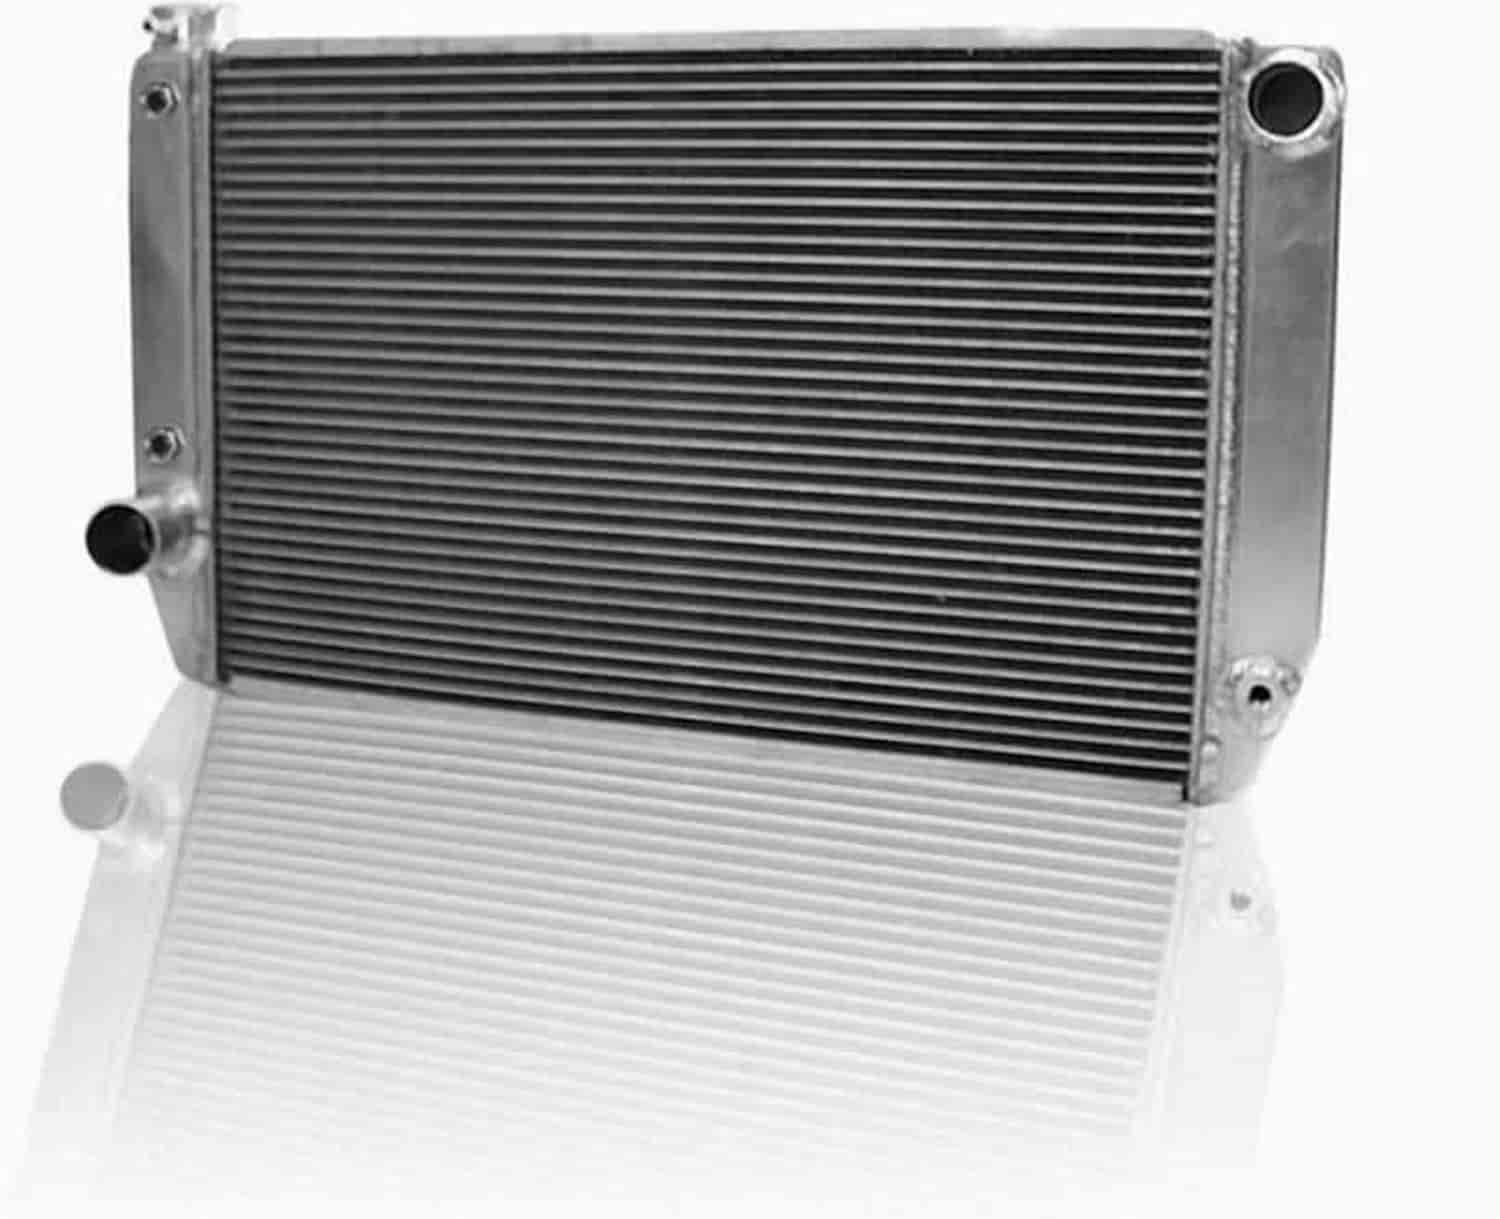 ClassicCool Universal Fit Radiator Single Pass Crossflow Design 27.50" x 15.50" with Transmission Cooler